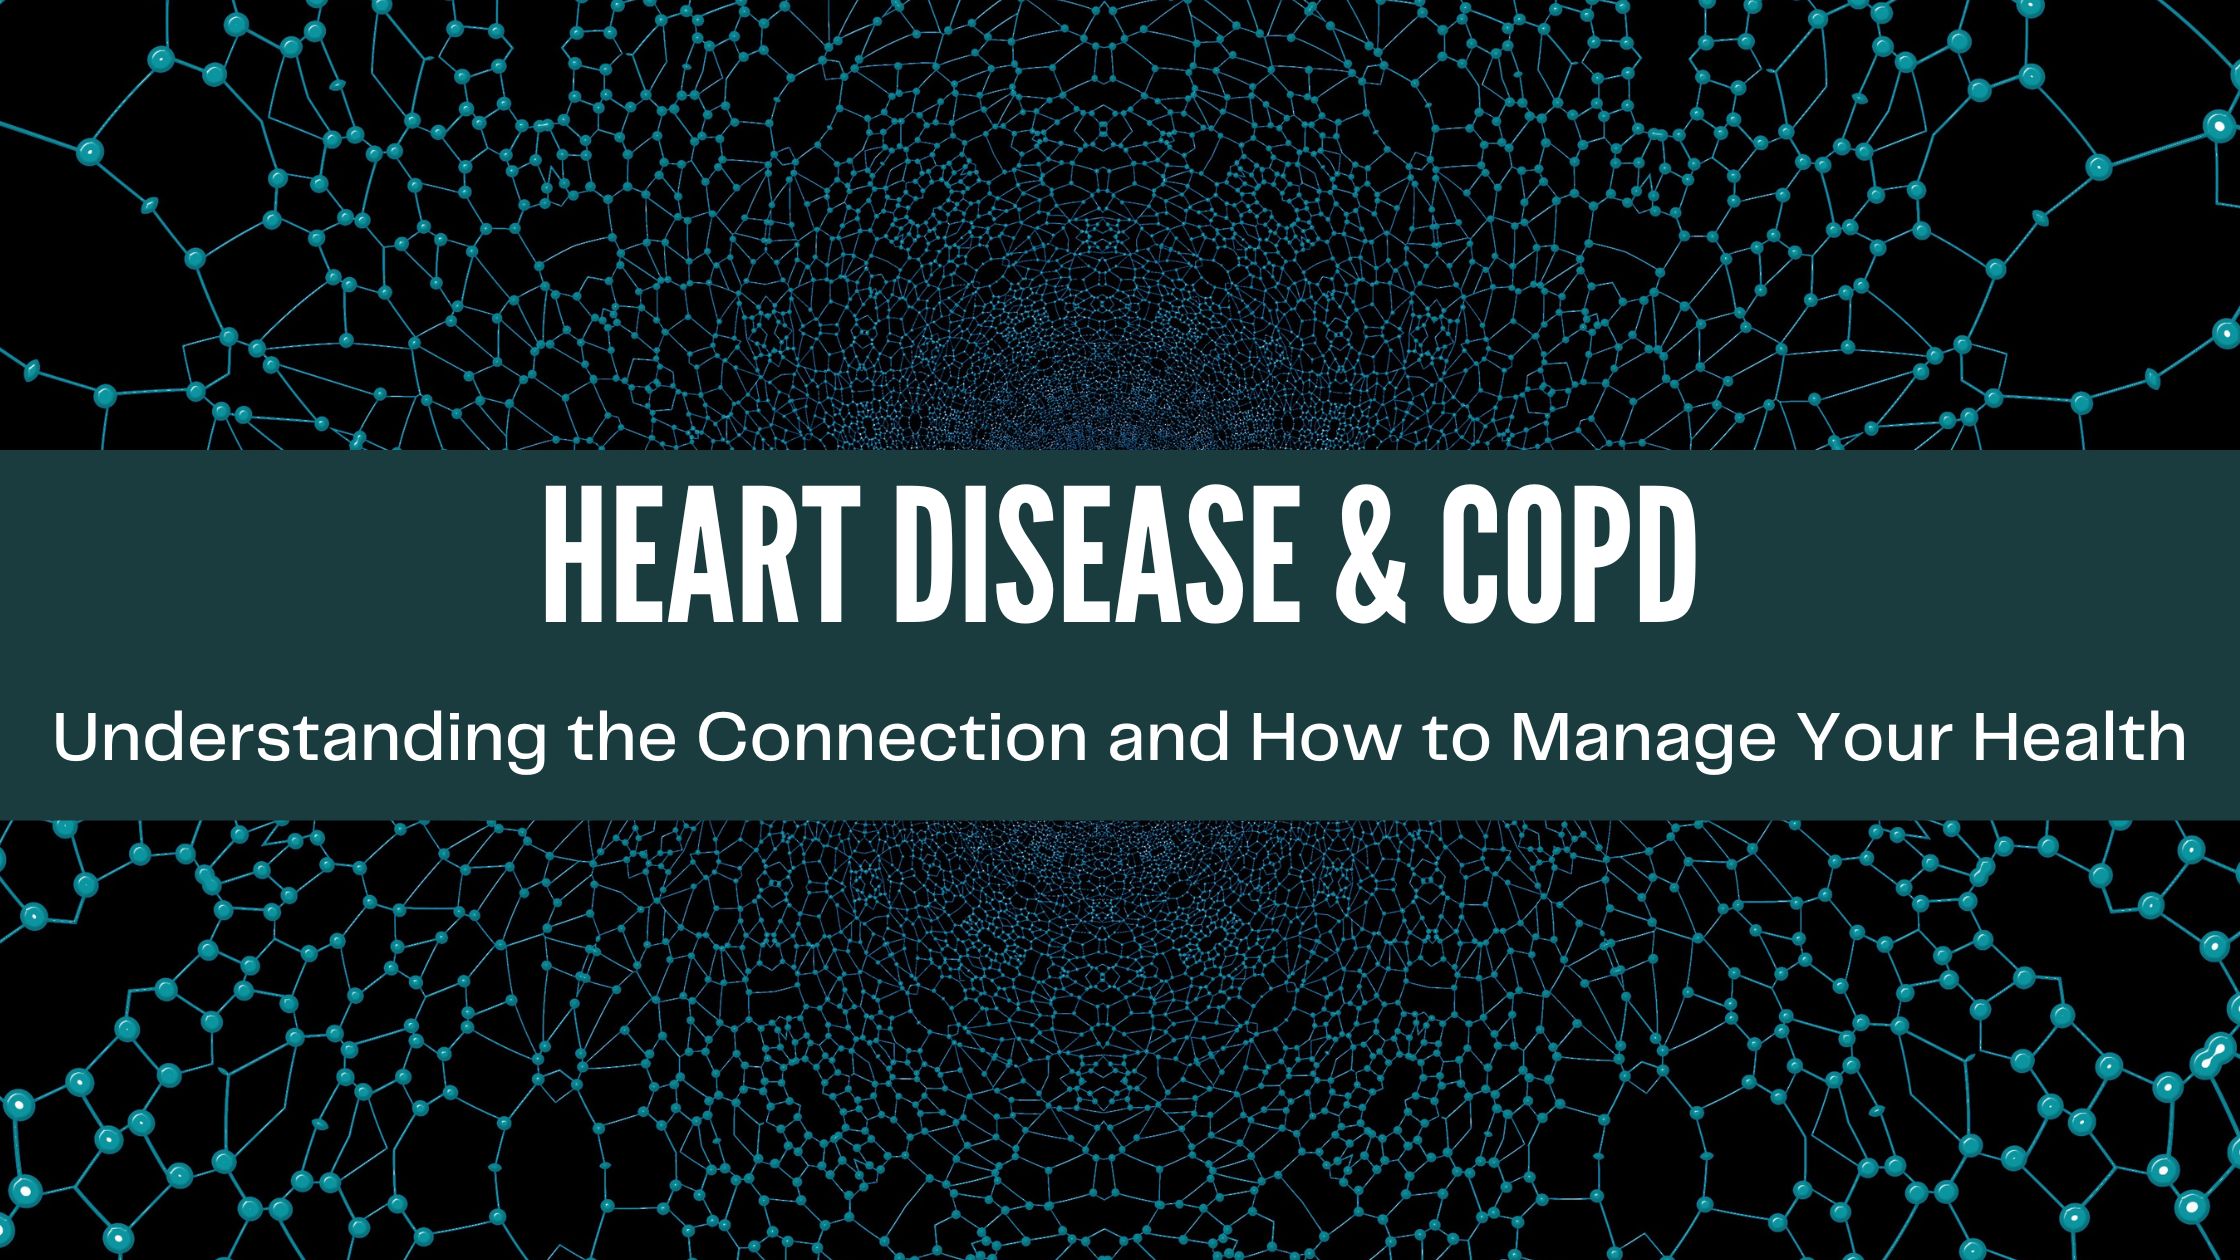 Heart Disease and COPD Understanding the Connection and How to Manage Your Health